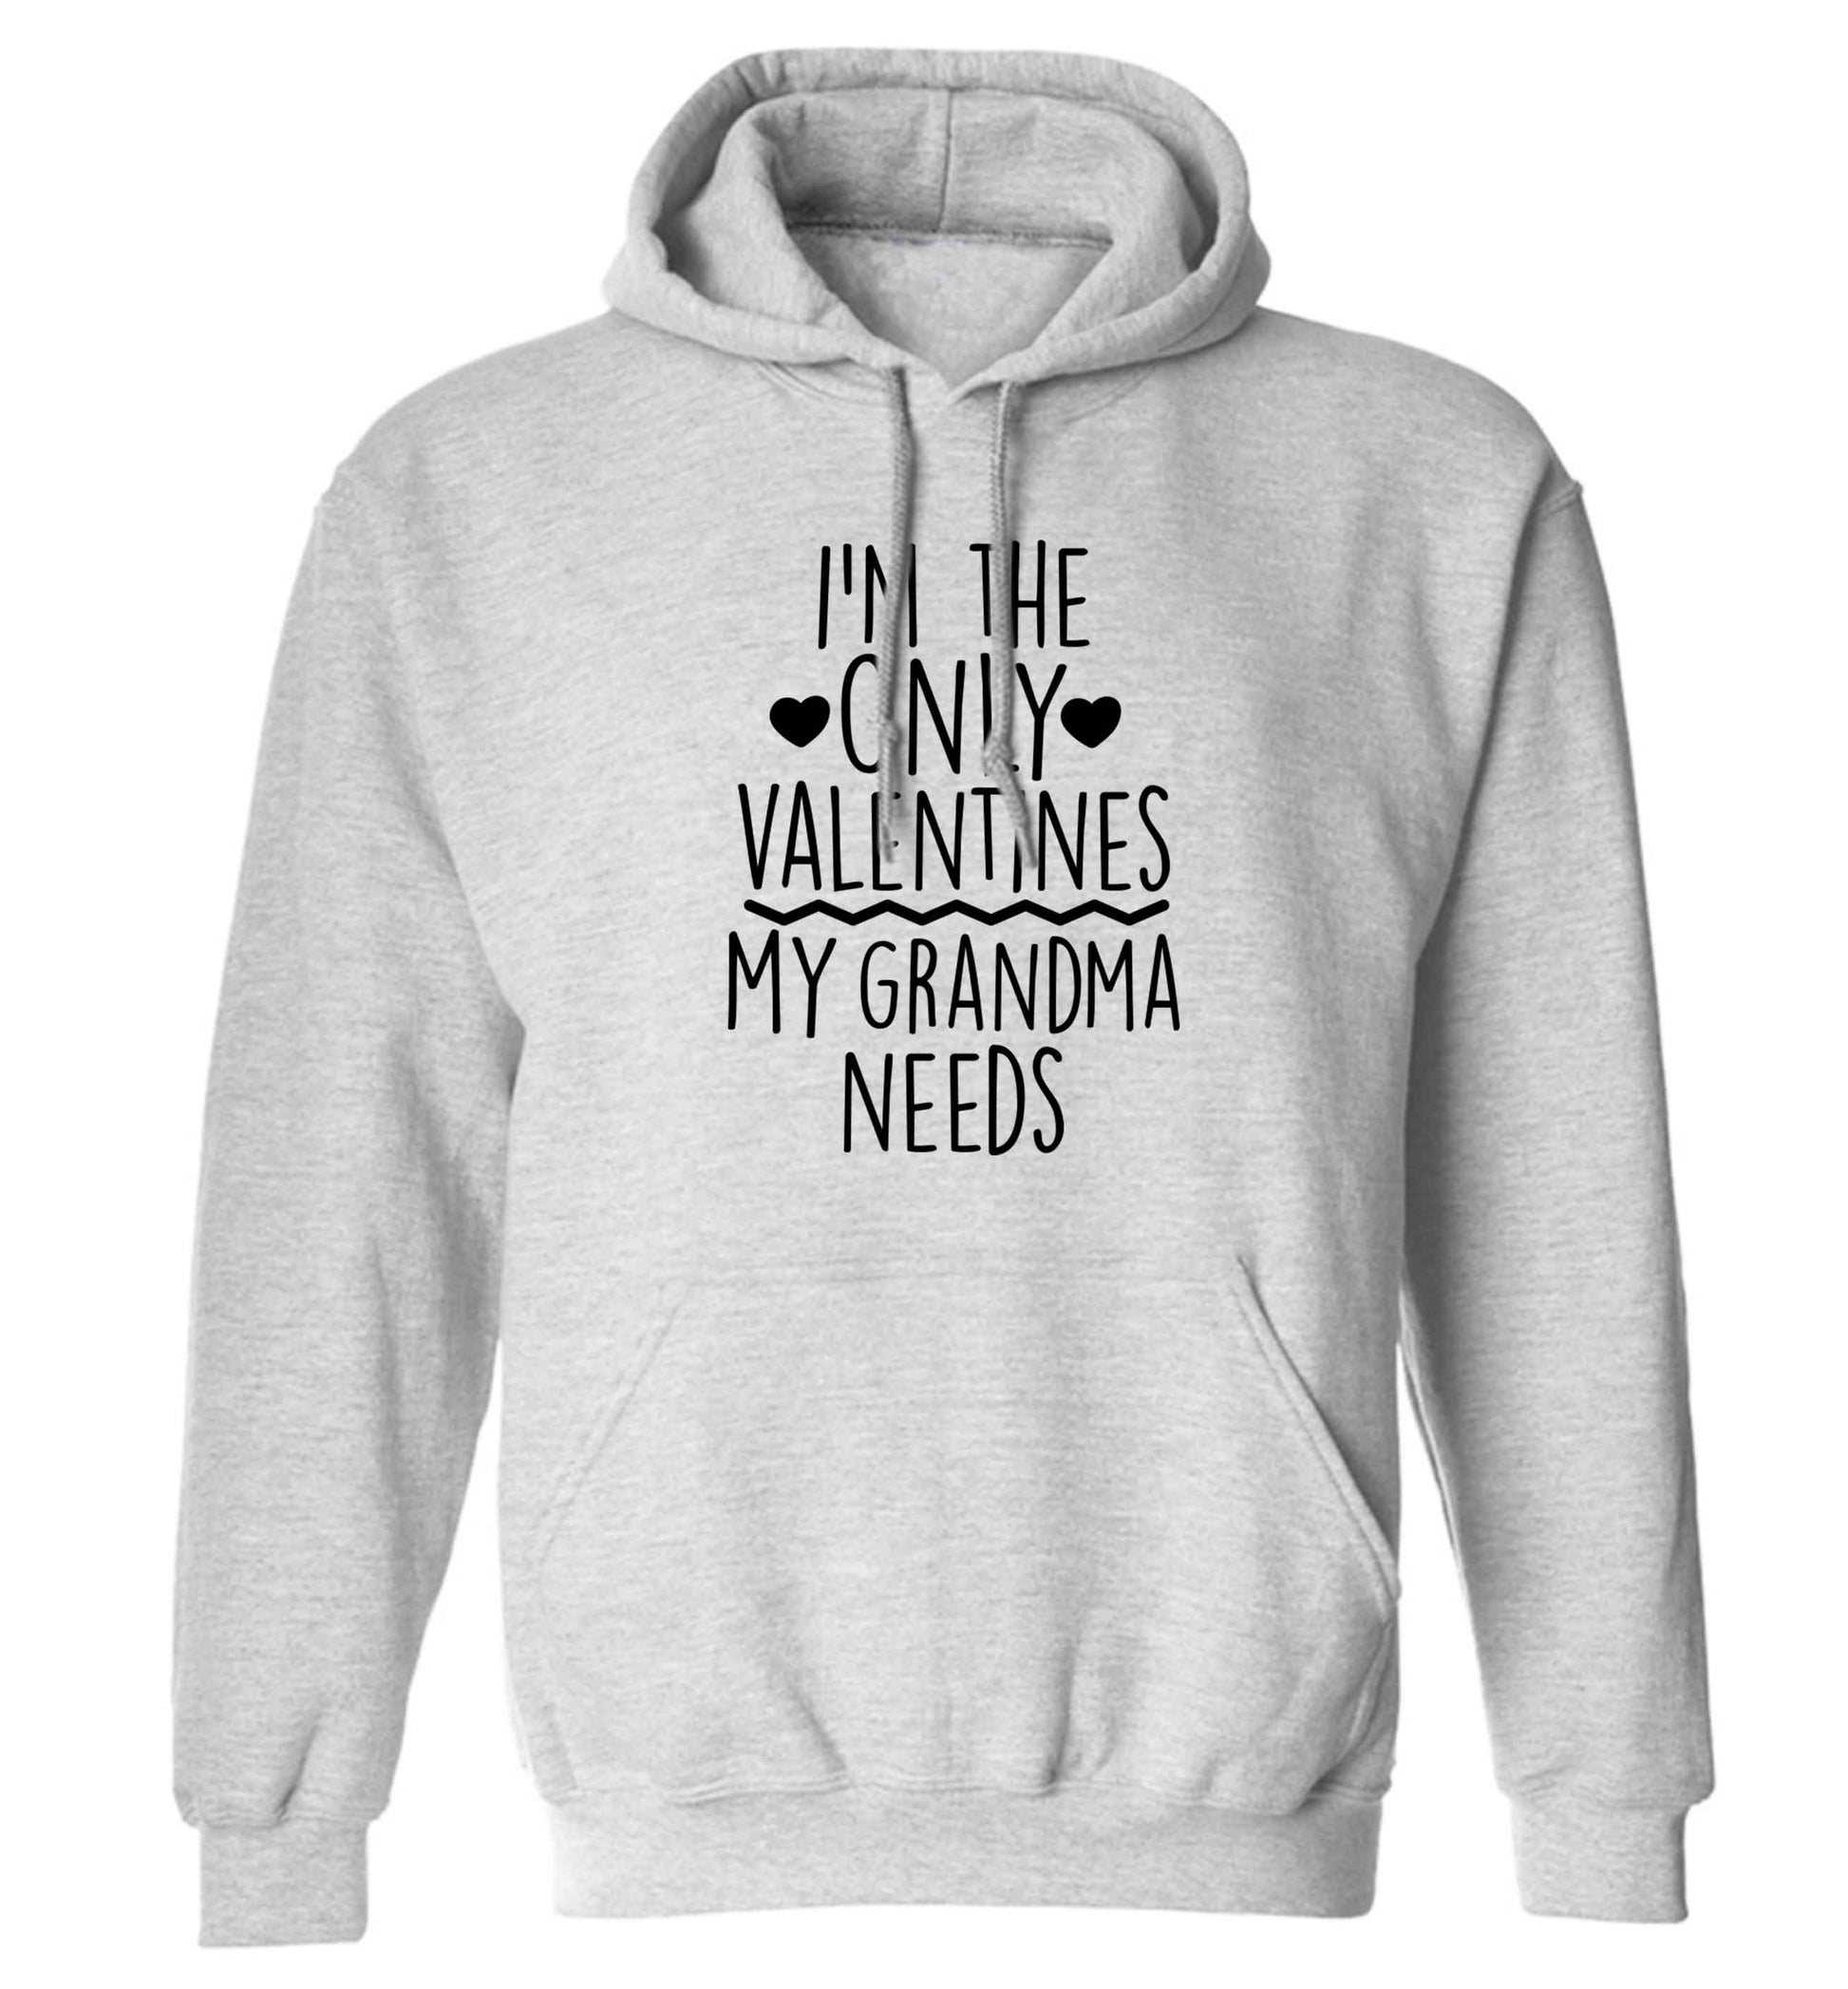 I'm the only valentines my grandma needs adults unisex grey hoodie 2XL